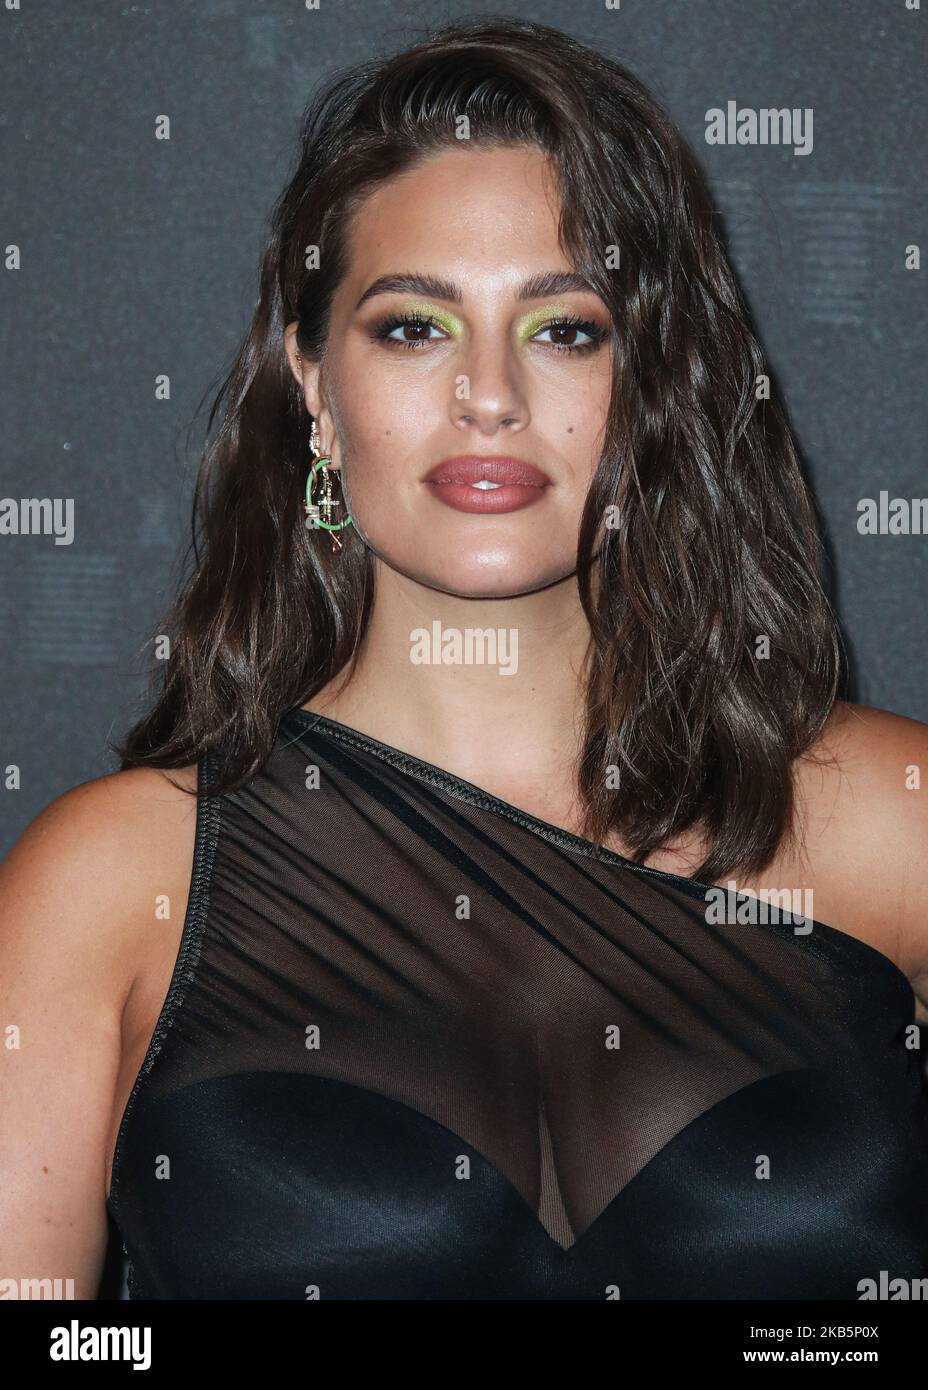 BROOKLYN, NEW YORK CITY, NEW YORK, USA - SEPTEMBER 10: Ashley Graham  arrives at the Savage X Fenty Show Presented By Amazon Prime Video held at  Barclays Center on September 10, 2019